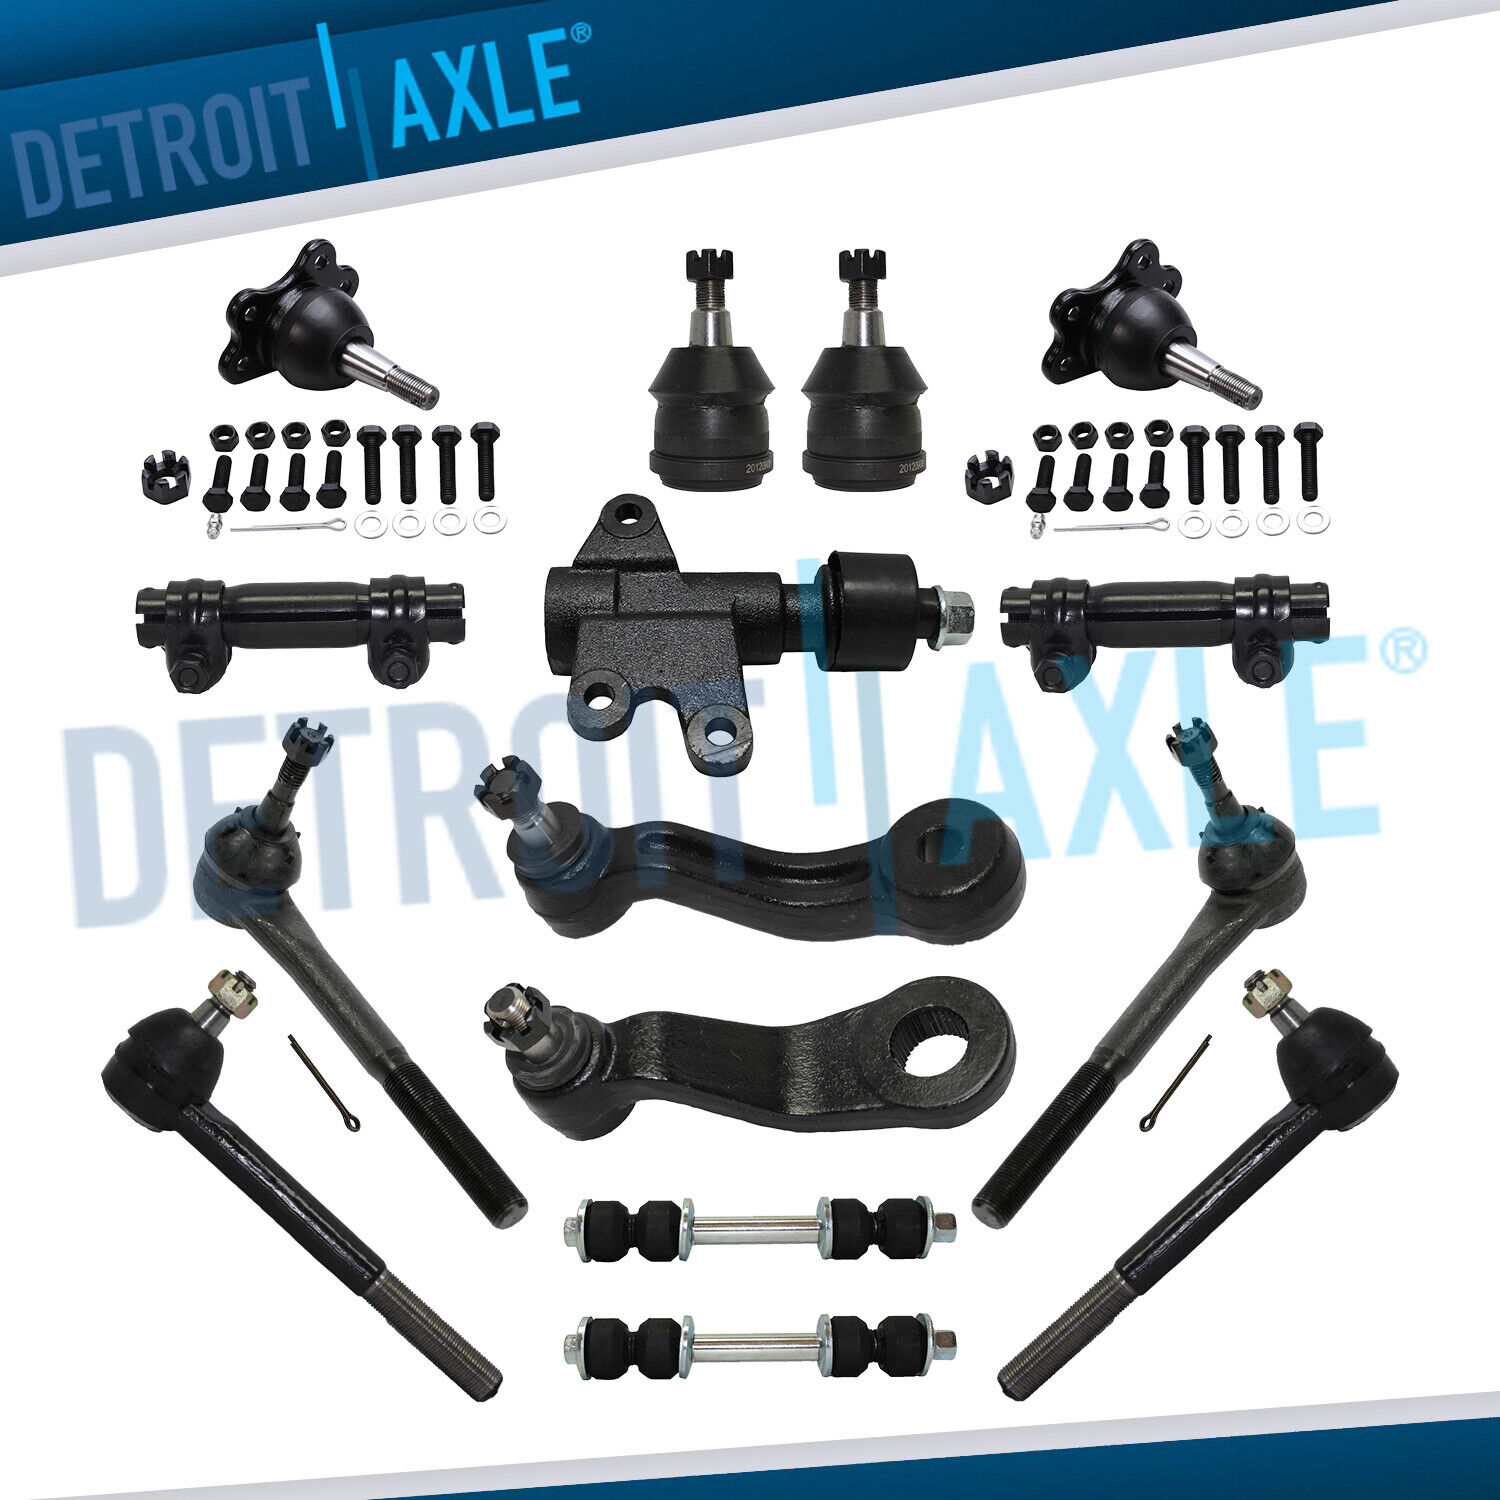 15pc 2WD Front Ball Joints Tie Rod Sway Bar Suspension Kit for C1500 C2500 Tahoe